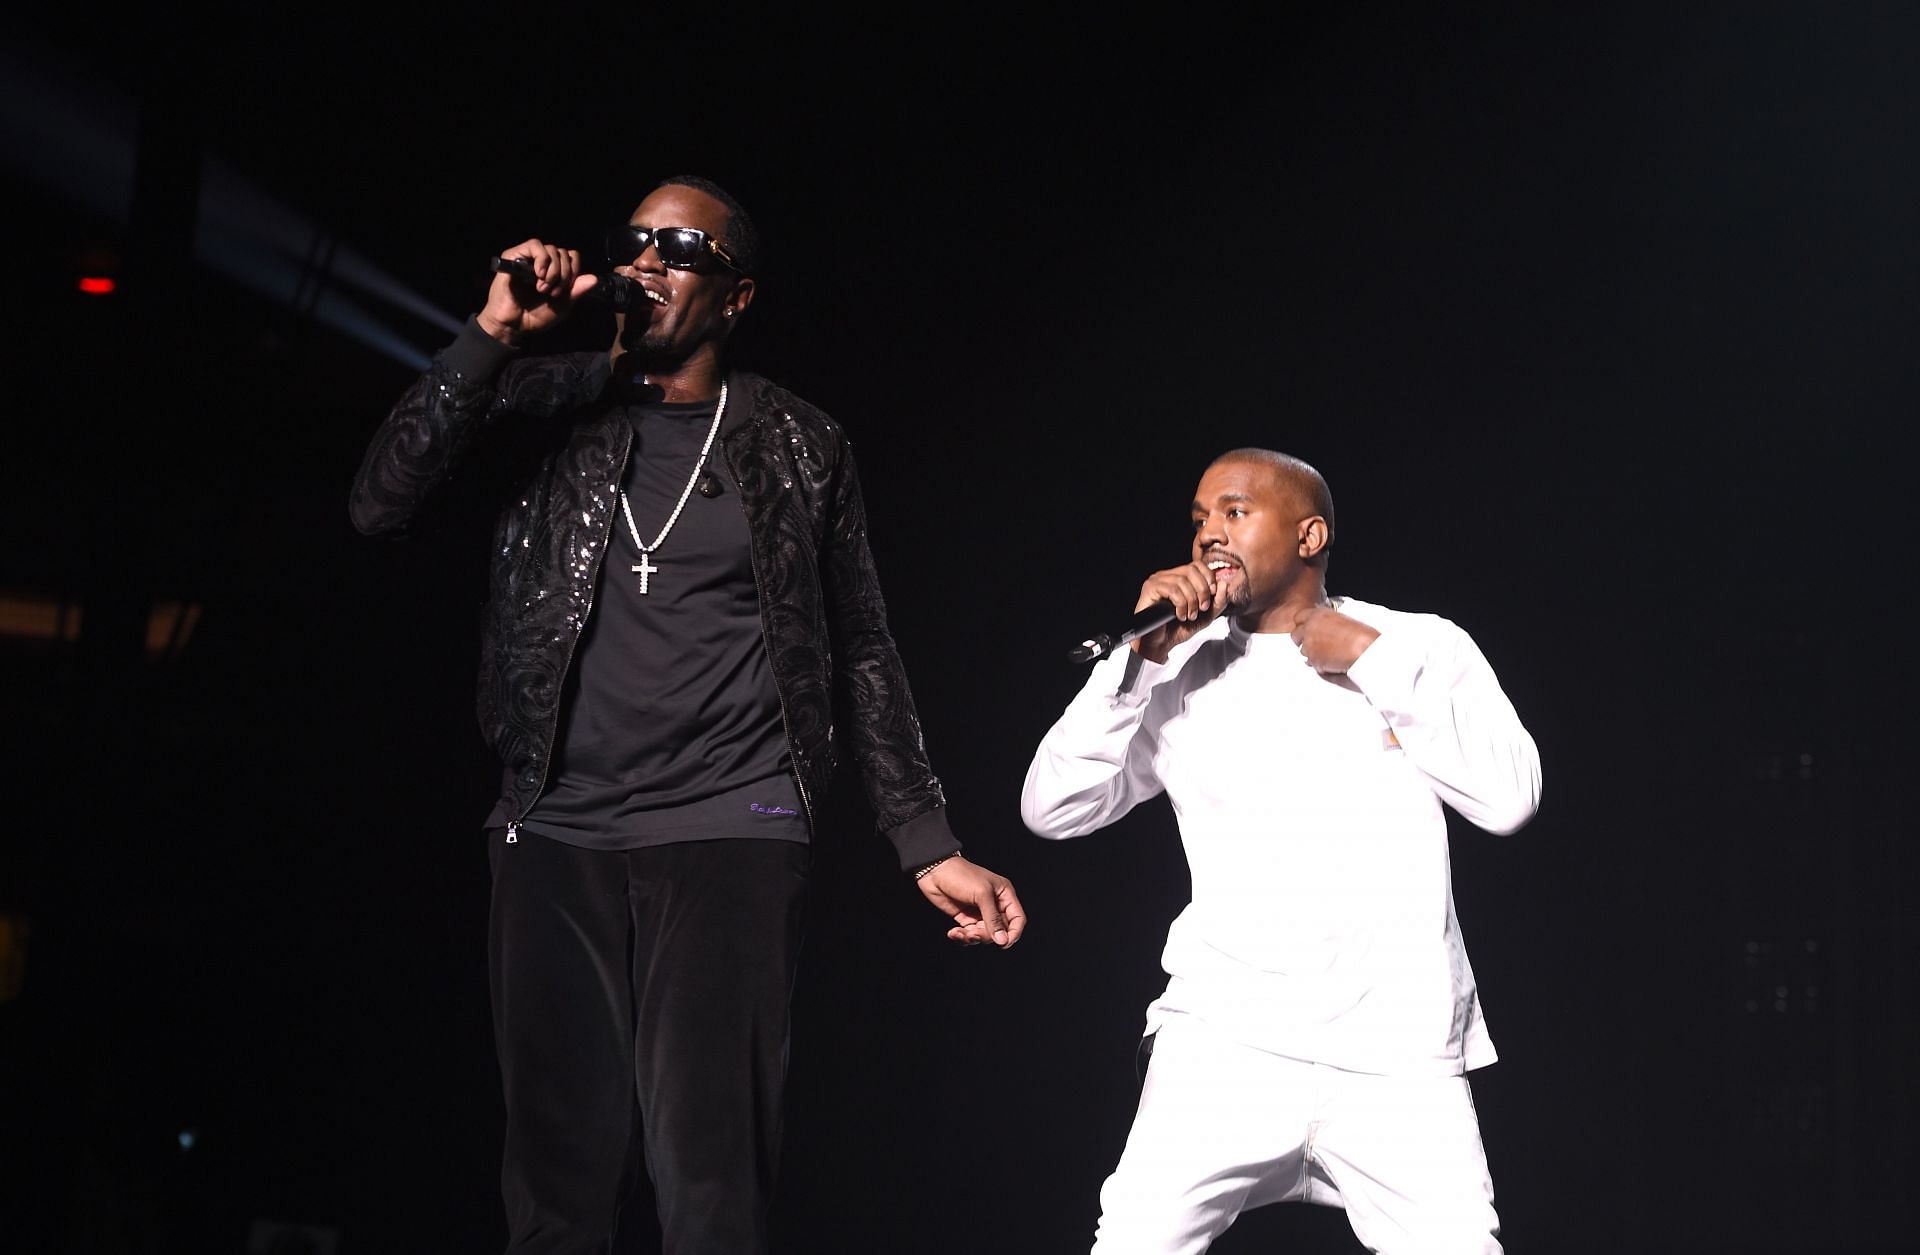 Diddy and Kanye had been accused of attempting assault (Image via Getty)